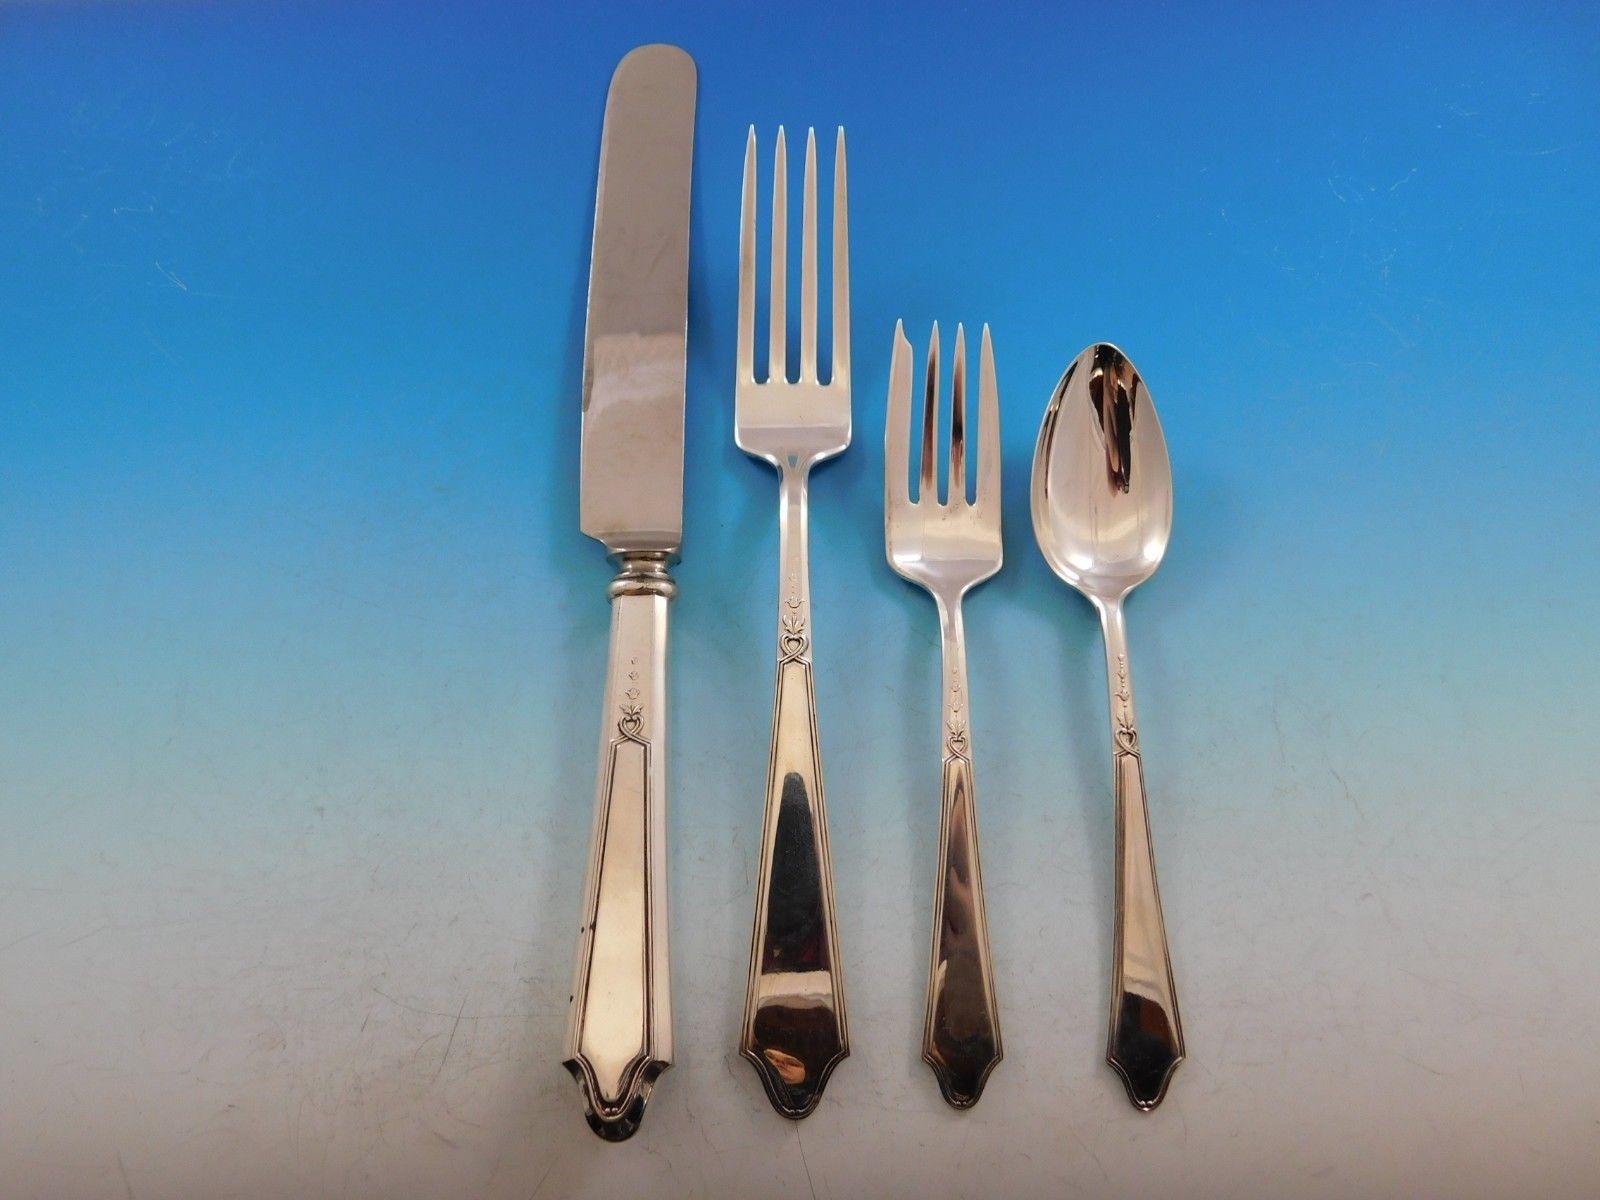 Impressive dinner and luncheon size Chateau aka Chateau Thierry by Lunt sterling silver flatware set, 89 pieces. This set includes:

12 dinner size knives, 9 1/2